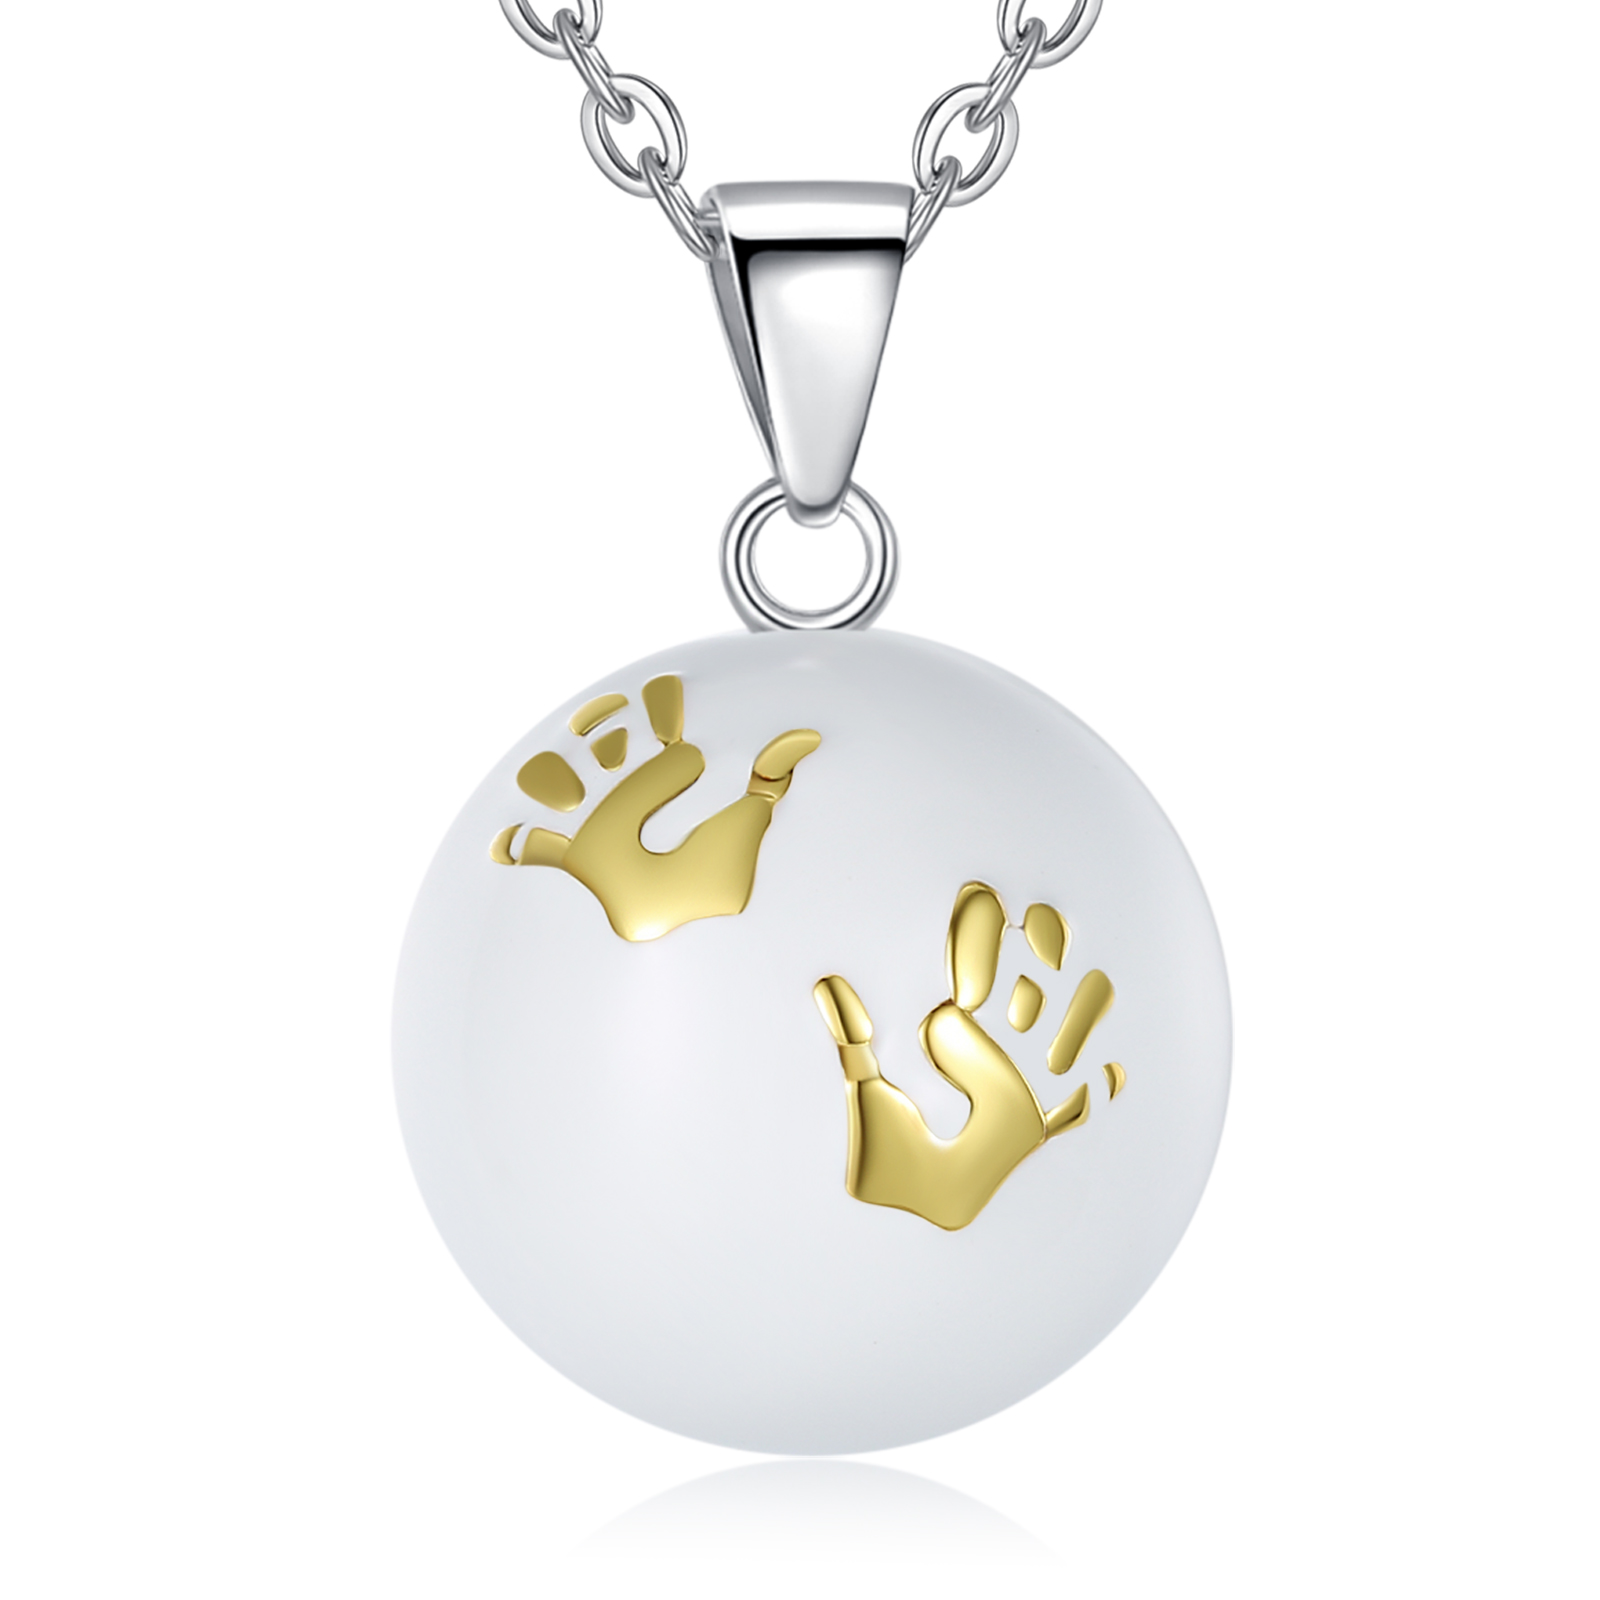 Merryshine Jewelry Angel Chime Caller Sound Bell Mexico Harmony Ball Necklaces for Pregnant Woman